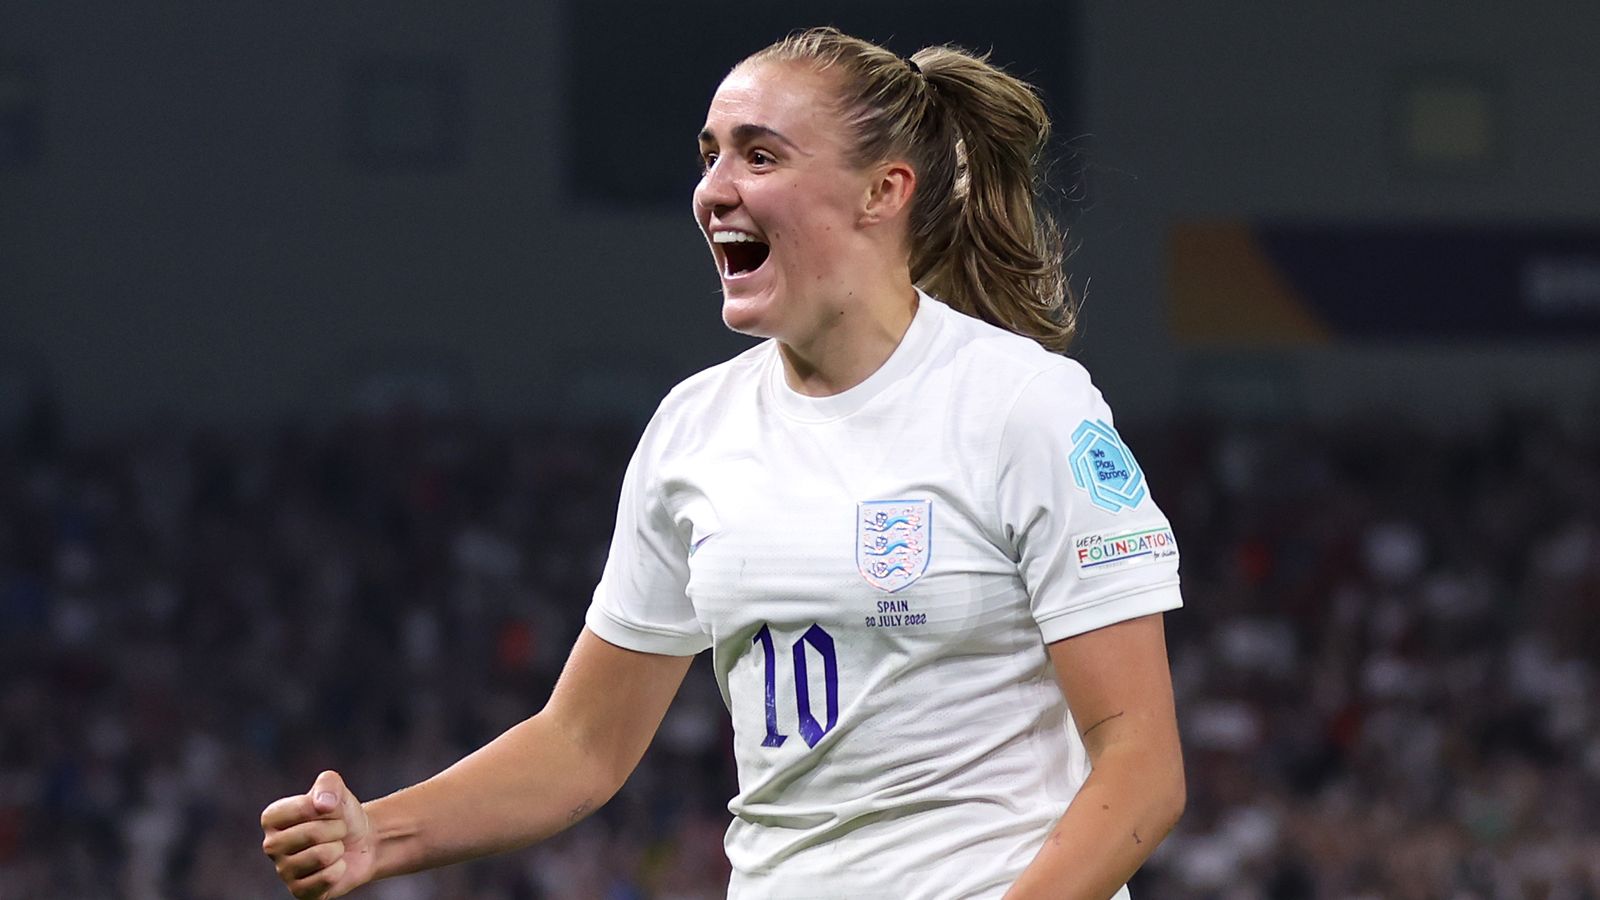 England vs Spain player ratings: Georgia Stanway stars with stunning winner after impressive midfield showing